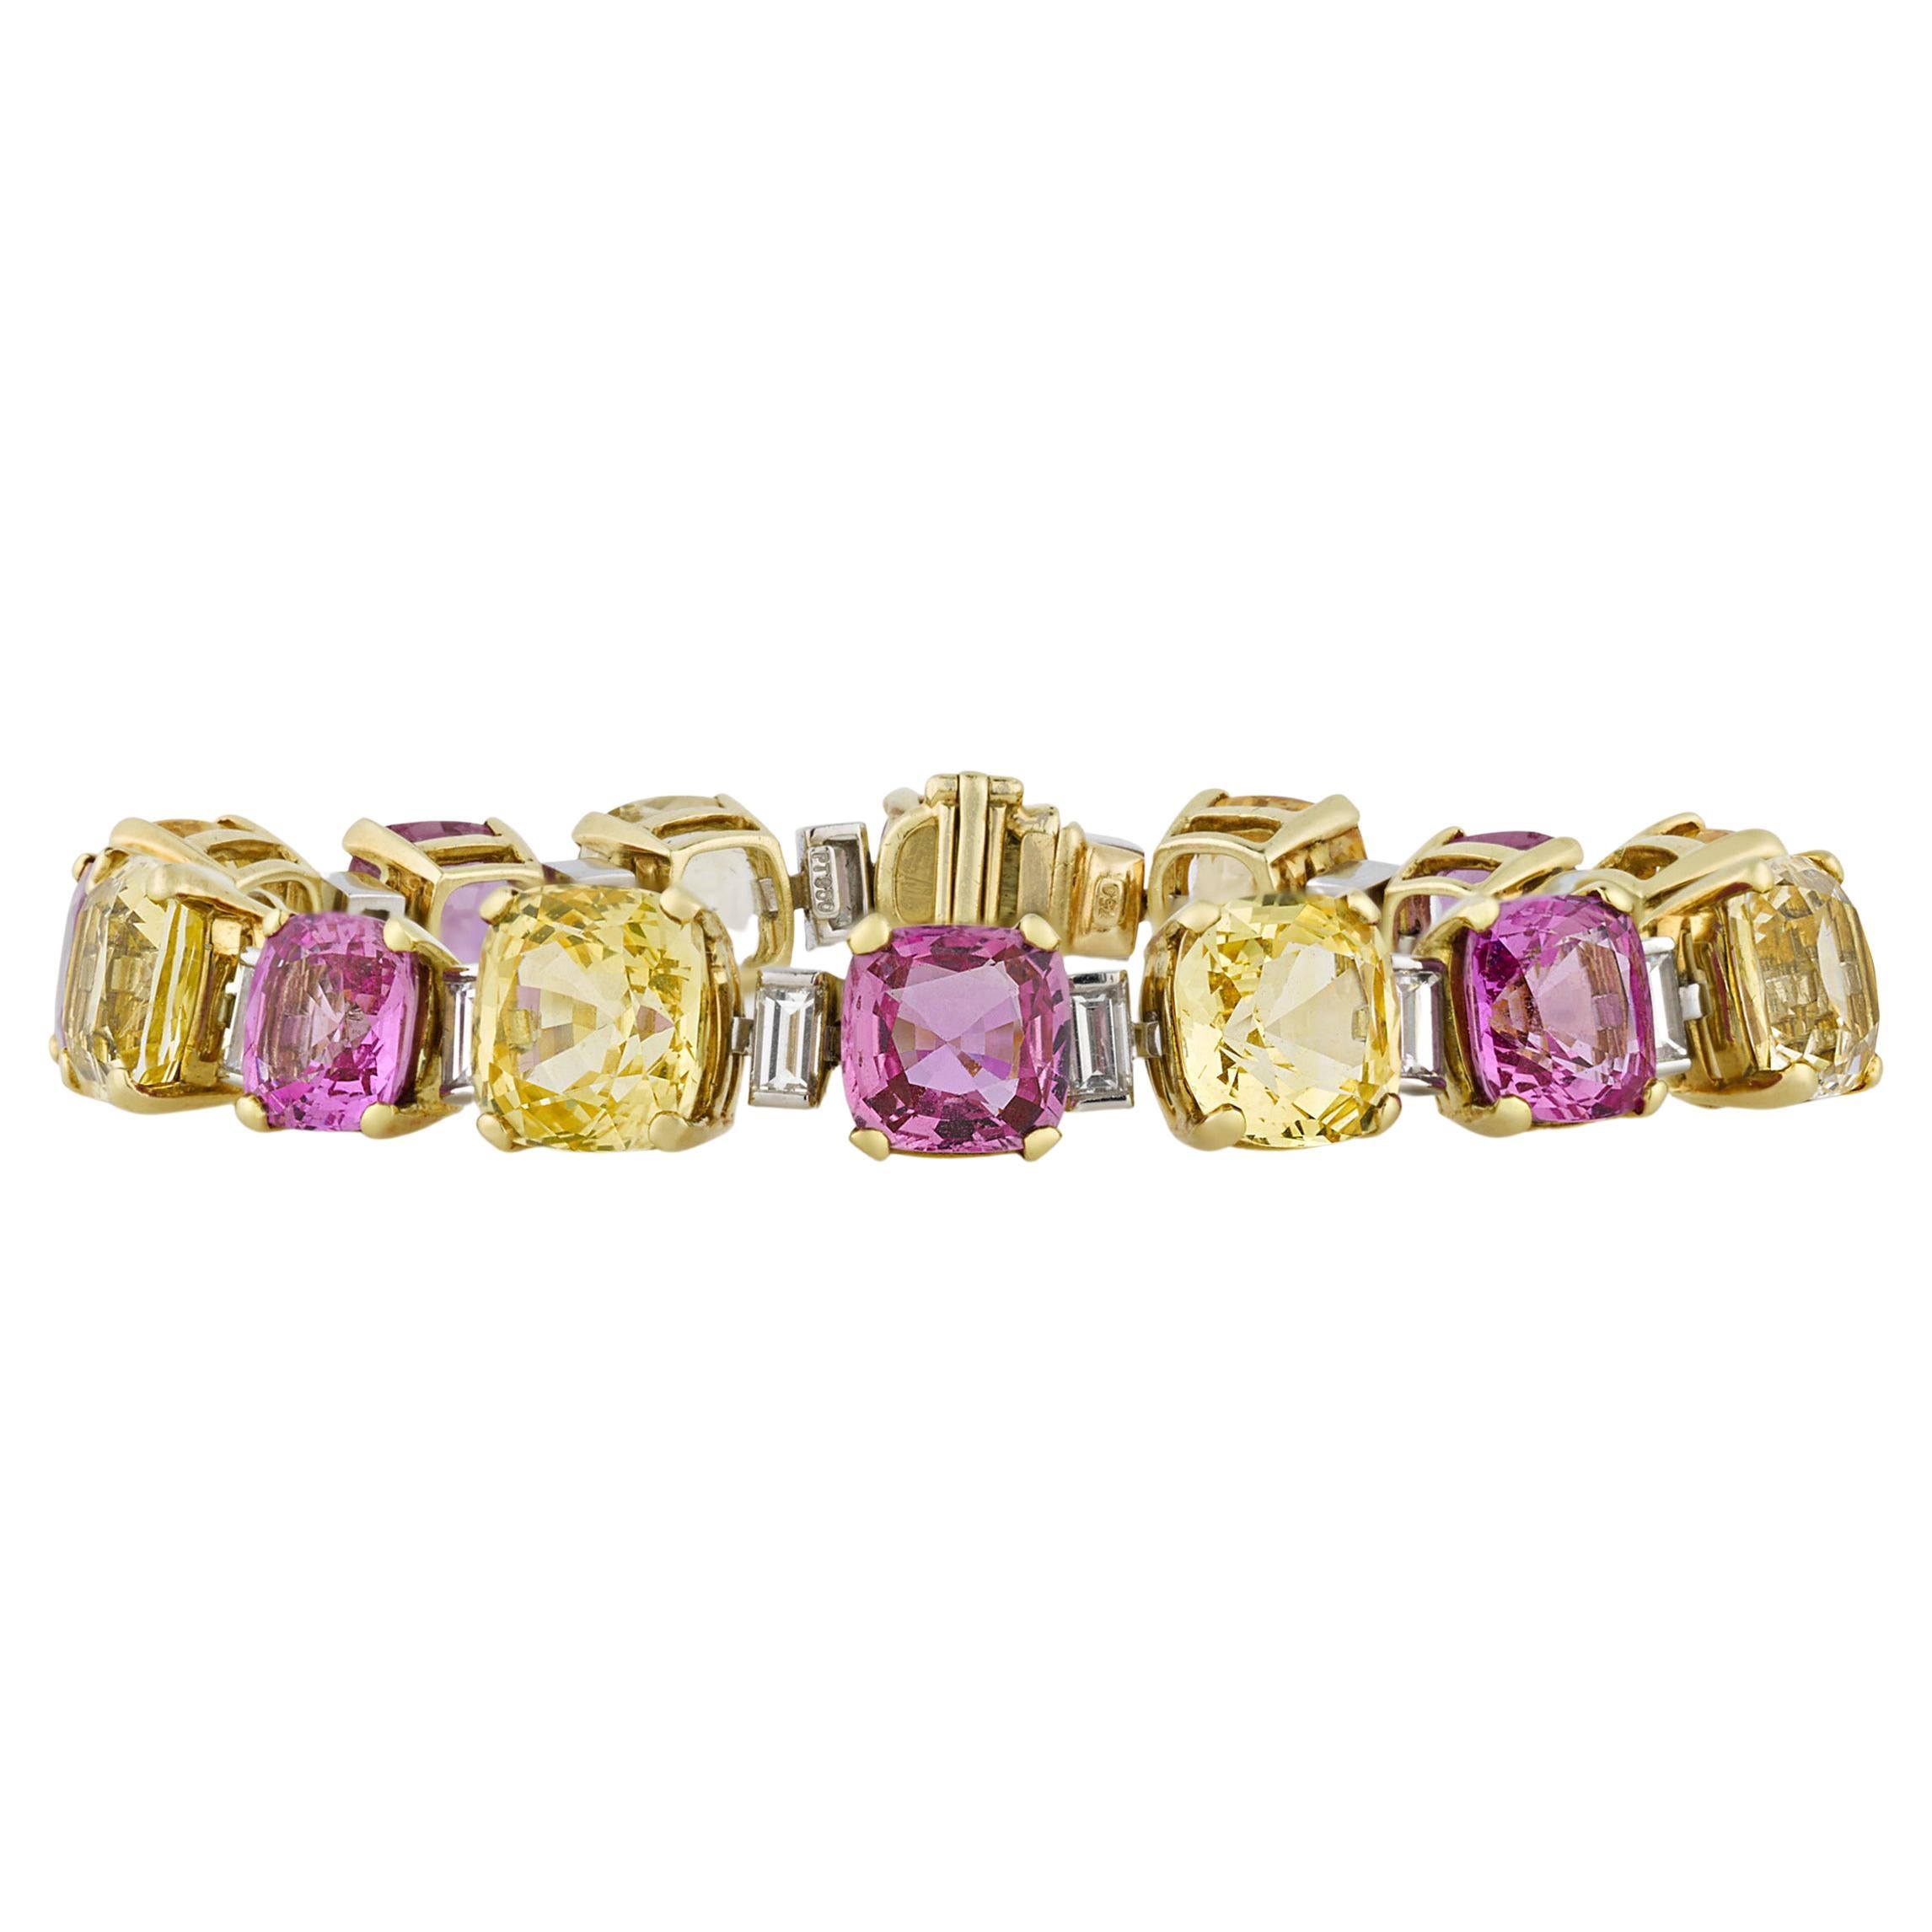 Pink and Yellow Sapphire Bracelet